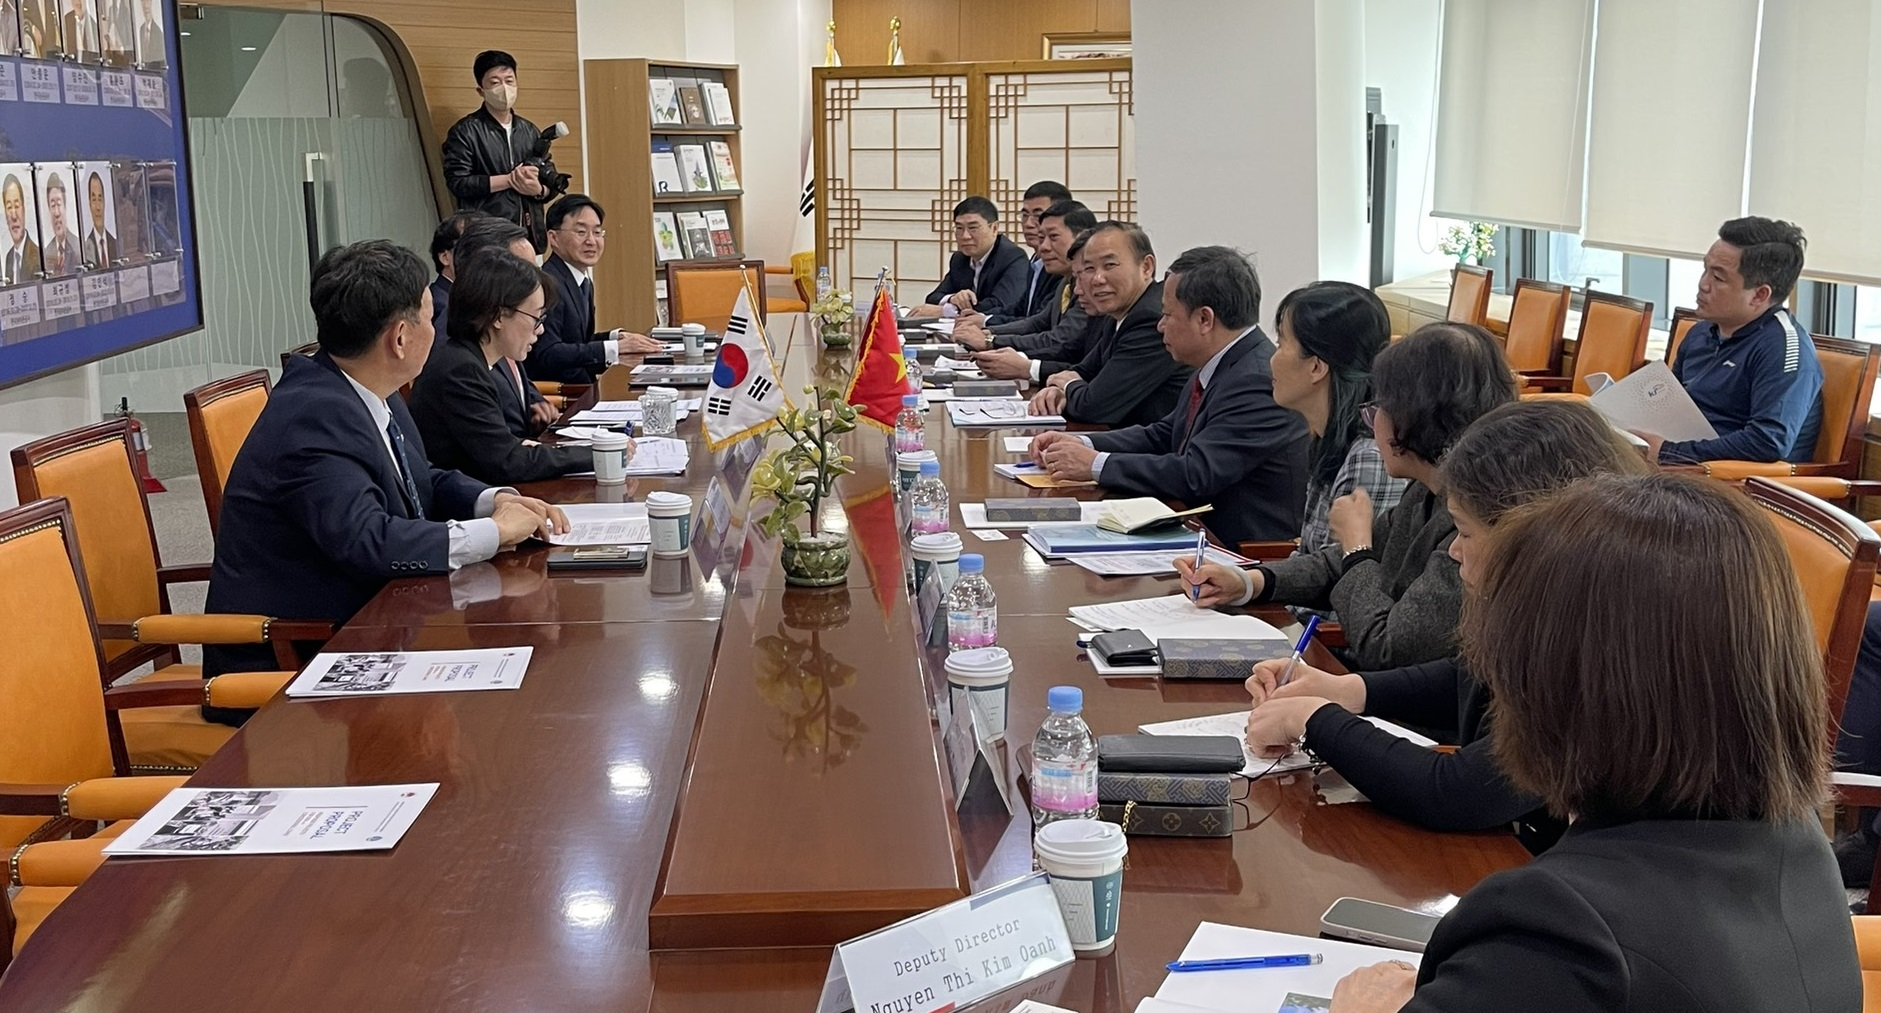 Deputy Minister Phung Duc Tien worked with Lee Byung Ho, Chairman of the Korean Rural Community Corporation, to discuss forthcoming agricultural cooperation (KRC).